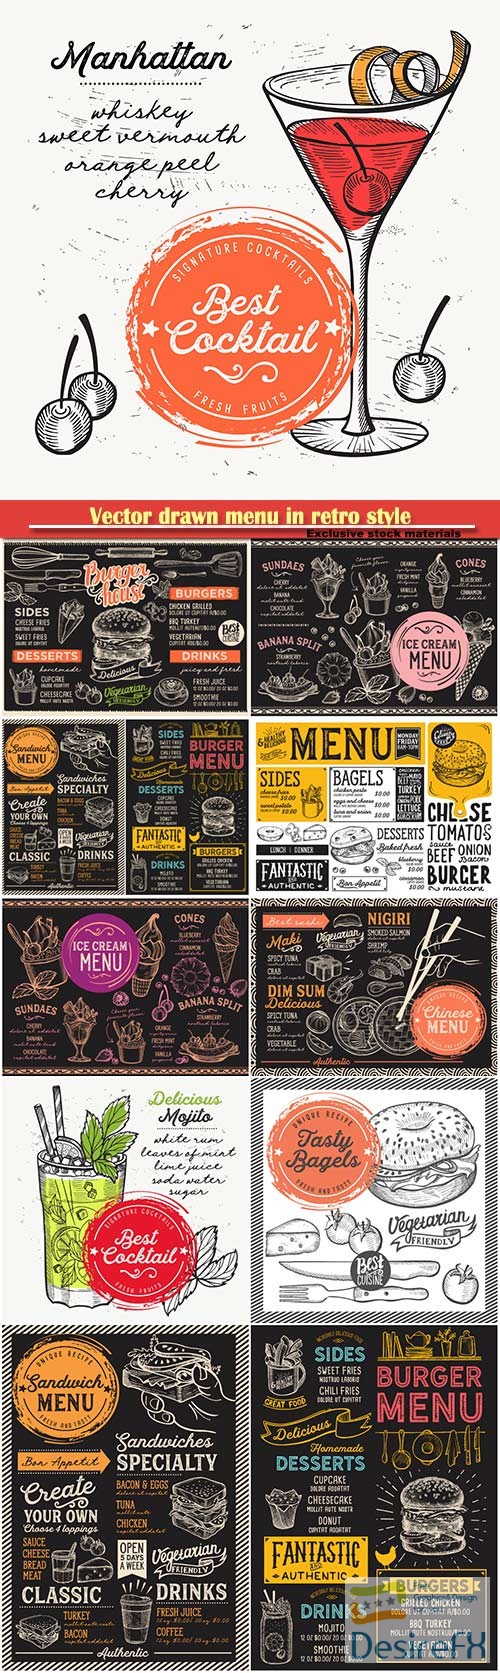 Vector drawn menu in retro style, fast food, sushi, ice cream, cocktails